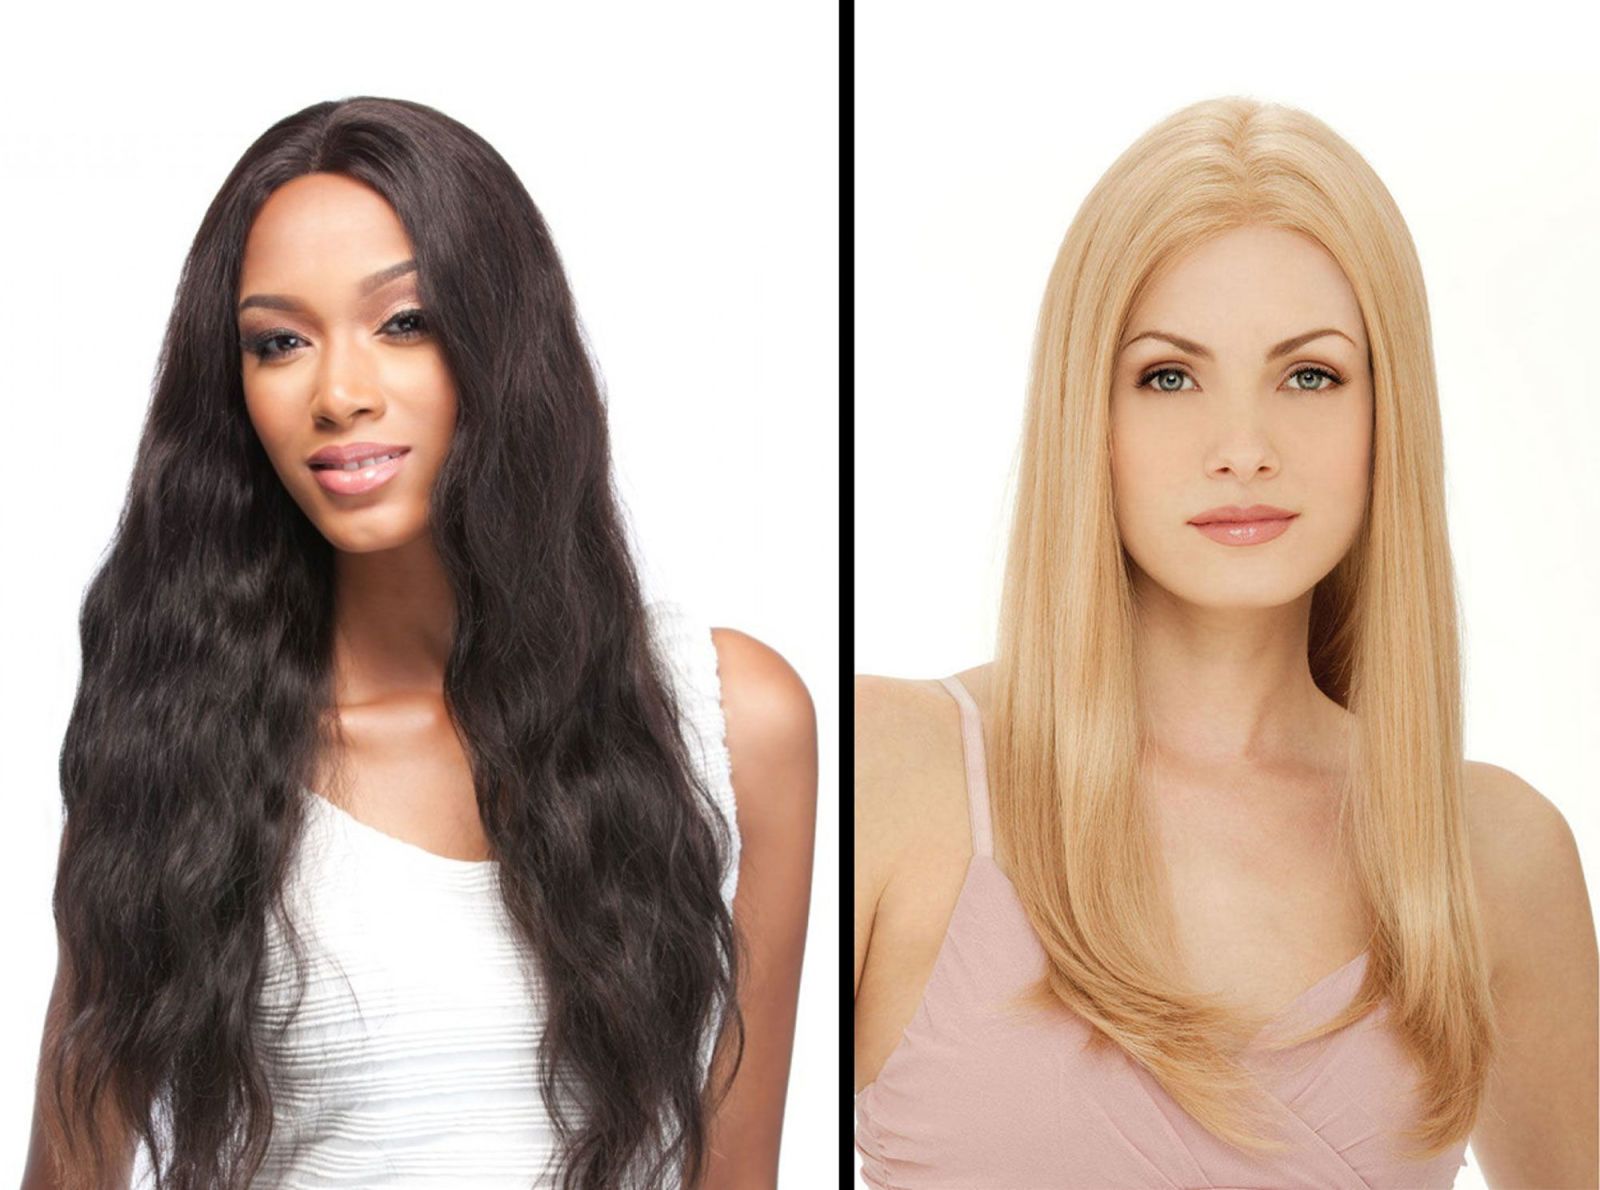 Human Hair Used in Wigs and Extensions